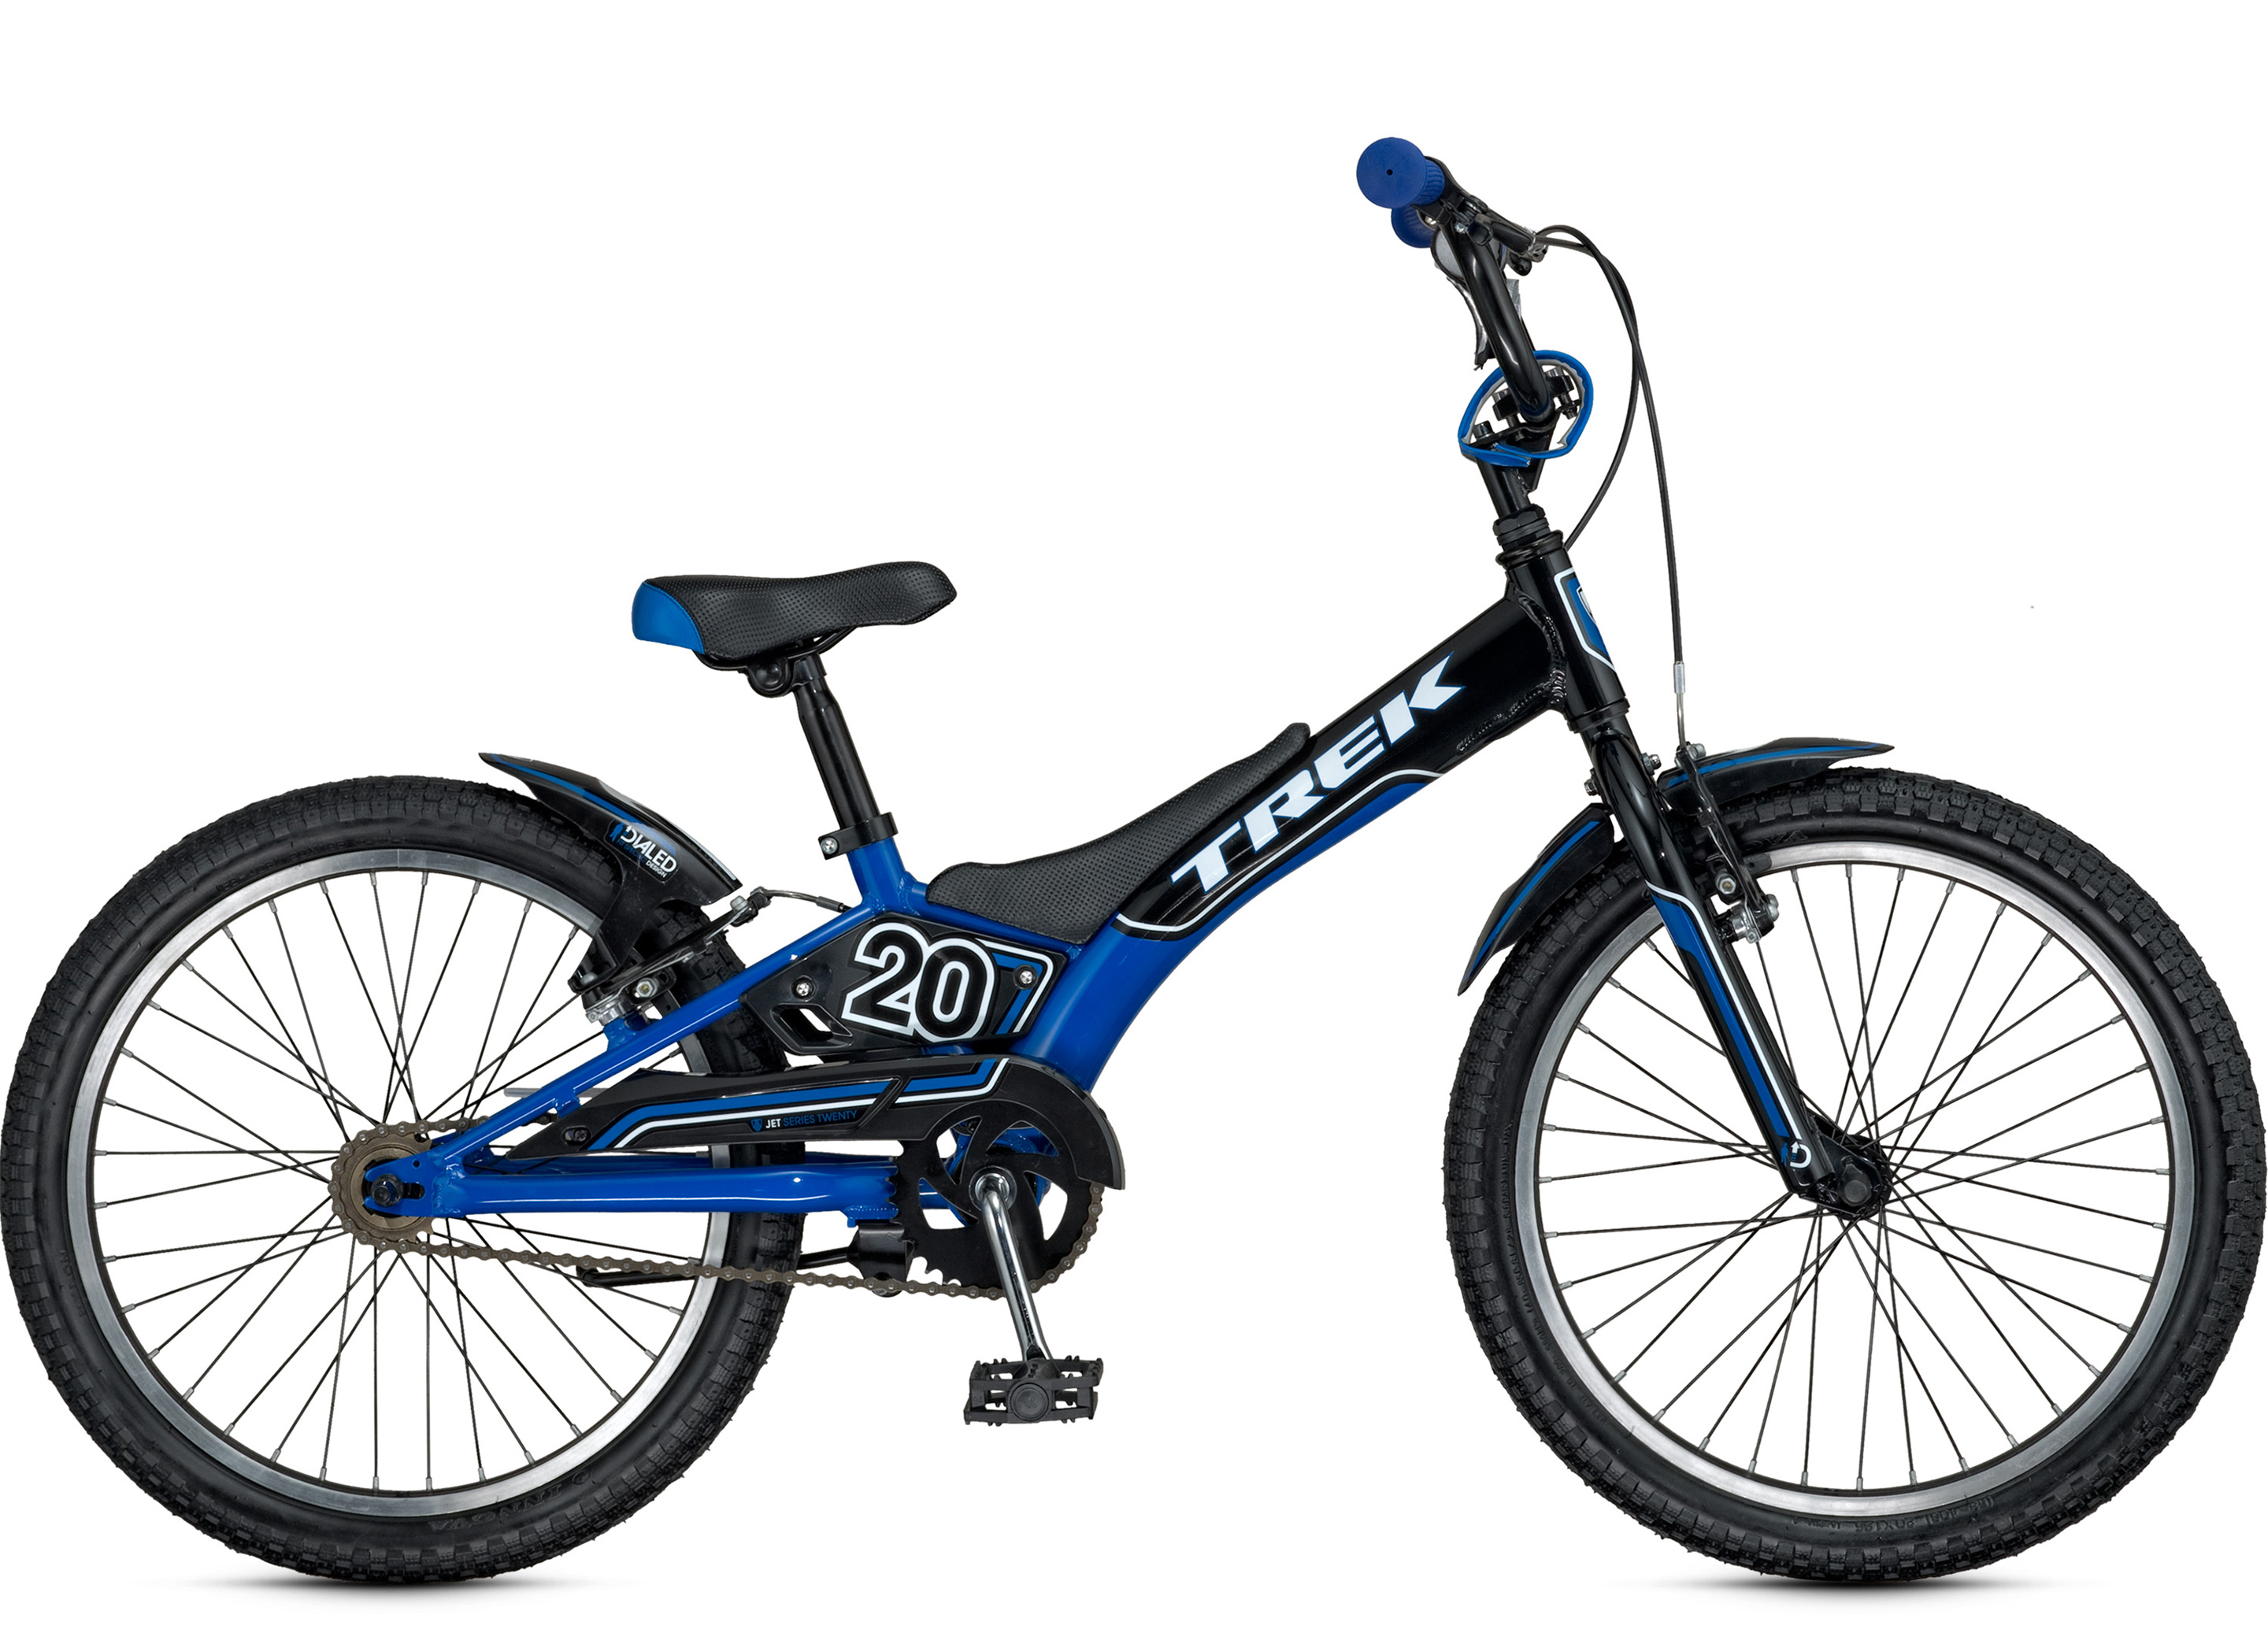 2013 Jet 20 E | Bouticycle